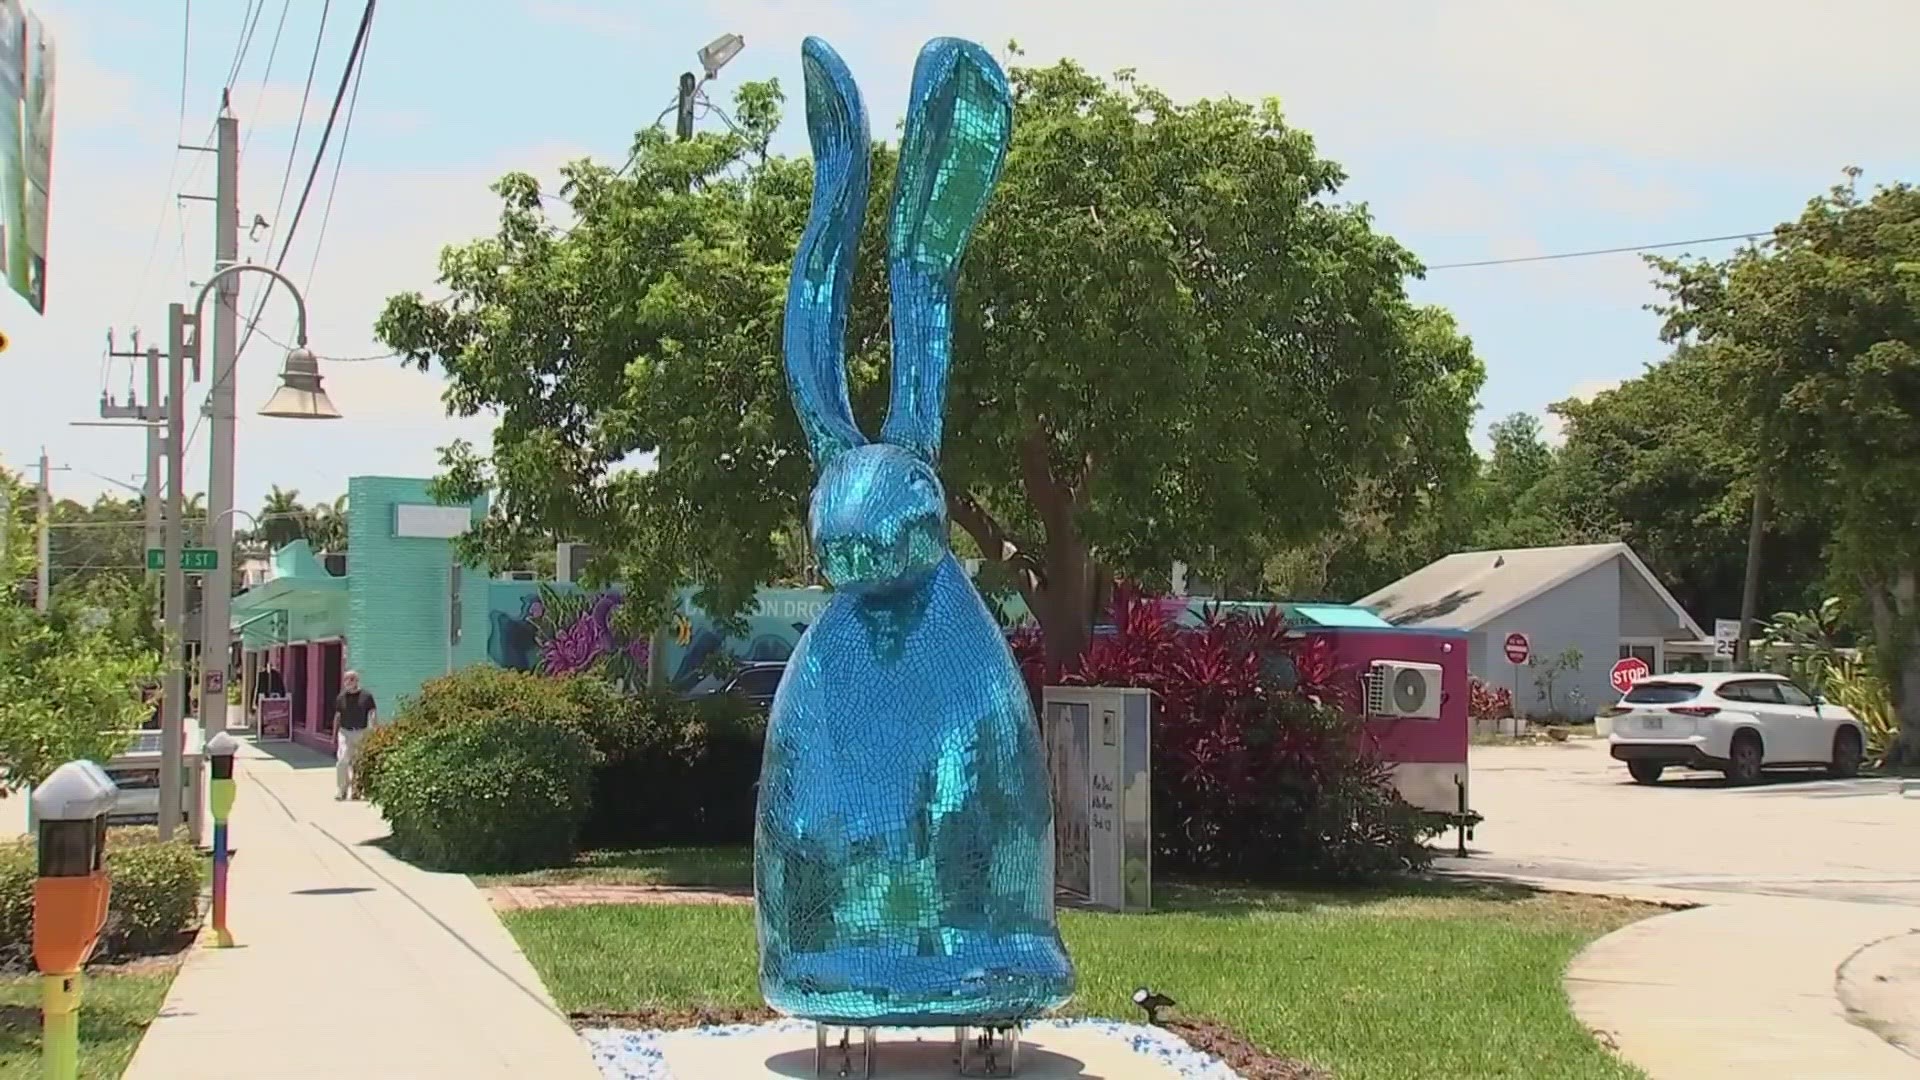 The sculpture is valued at $300,000 and was just installed in Wilton Manors, a city just north of Fort Lauderdale, Florida.